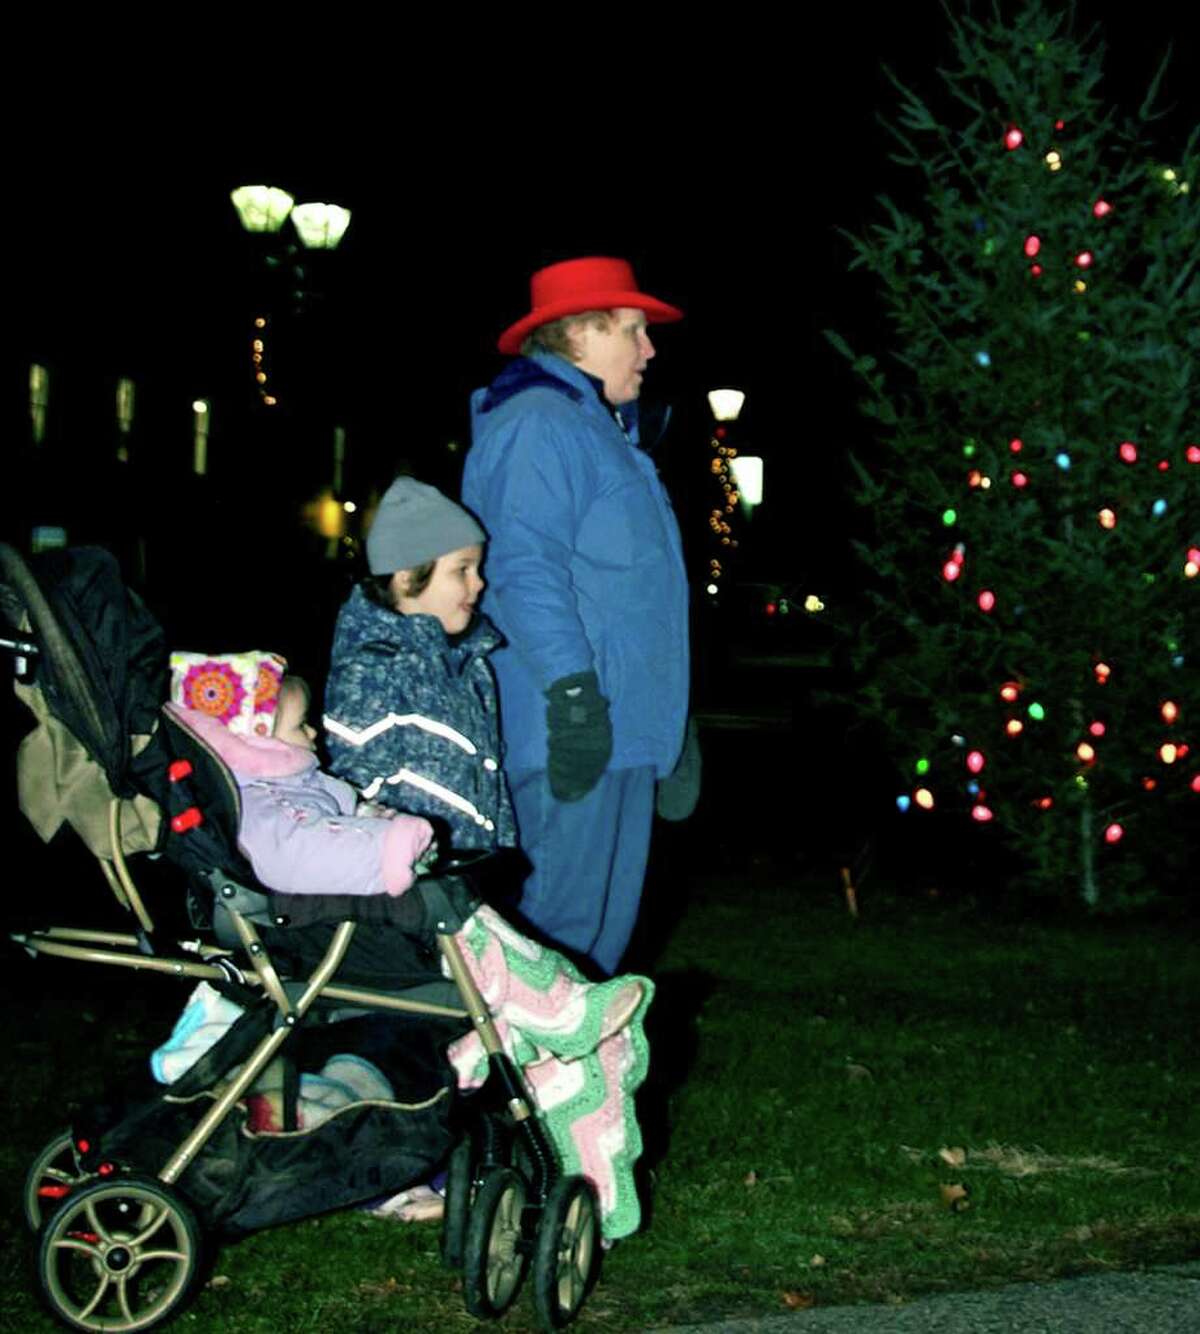 SPECTRUM/That's Bonnie Knapp of New Milford with grandchildren Harper Knapp, 4, and Marley Knapp, almost 2, singing carols on the Village Green during the Village Center Organization's Dec. 3, 2010 Festival of Lights and other downtown holiday events.